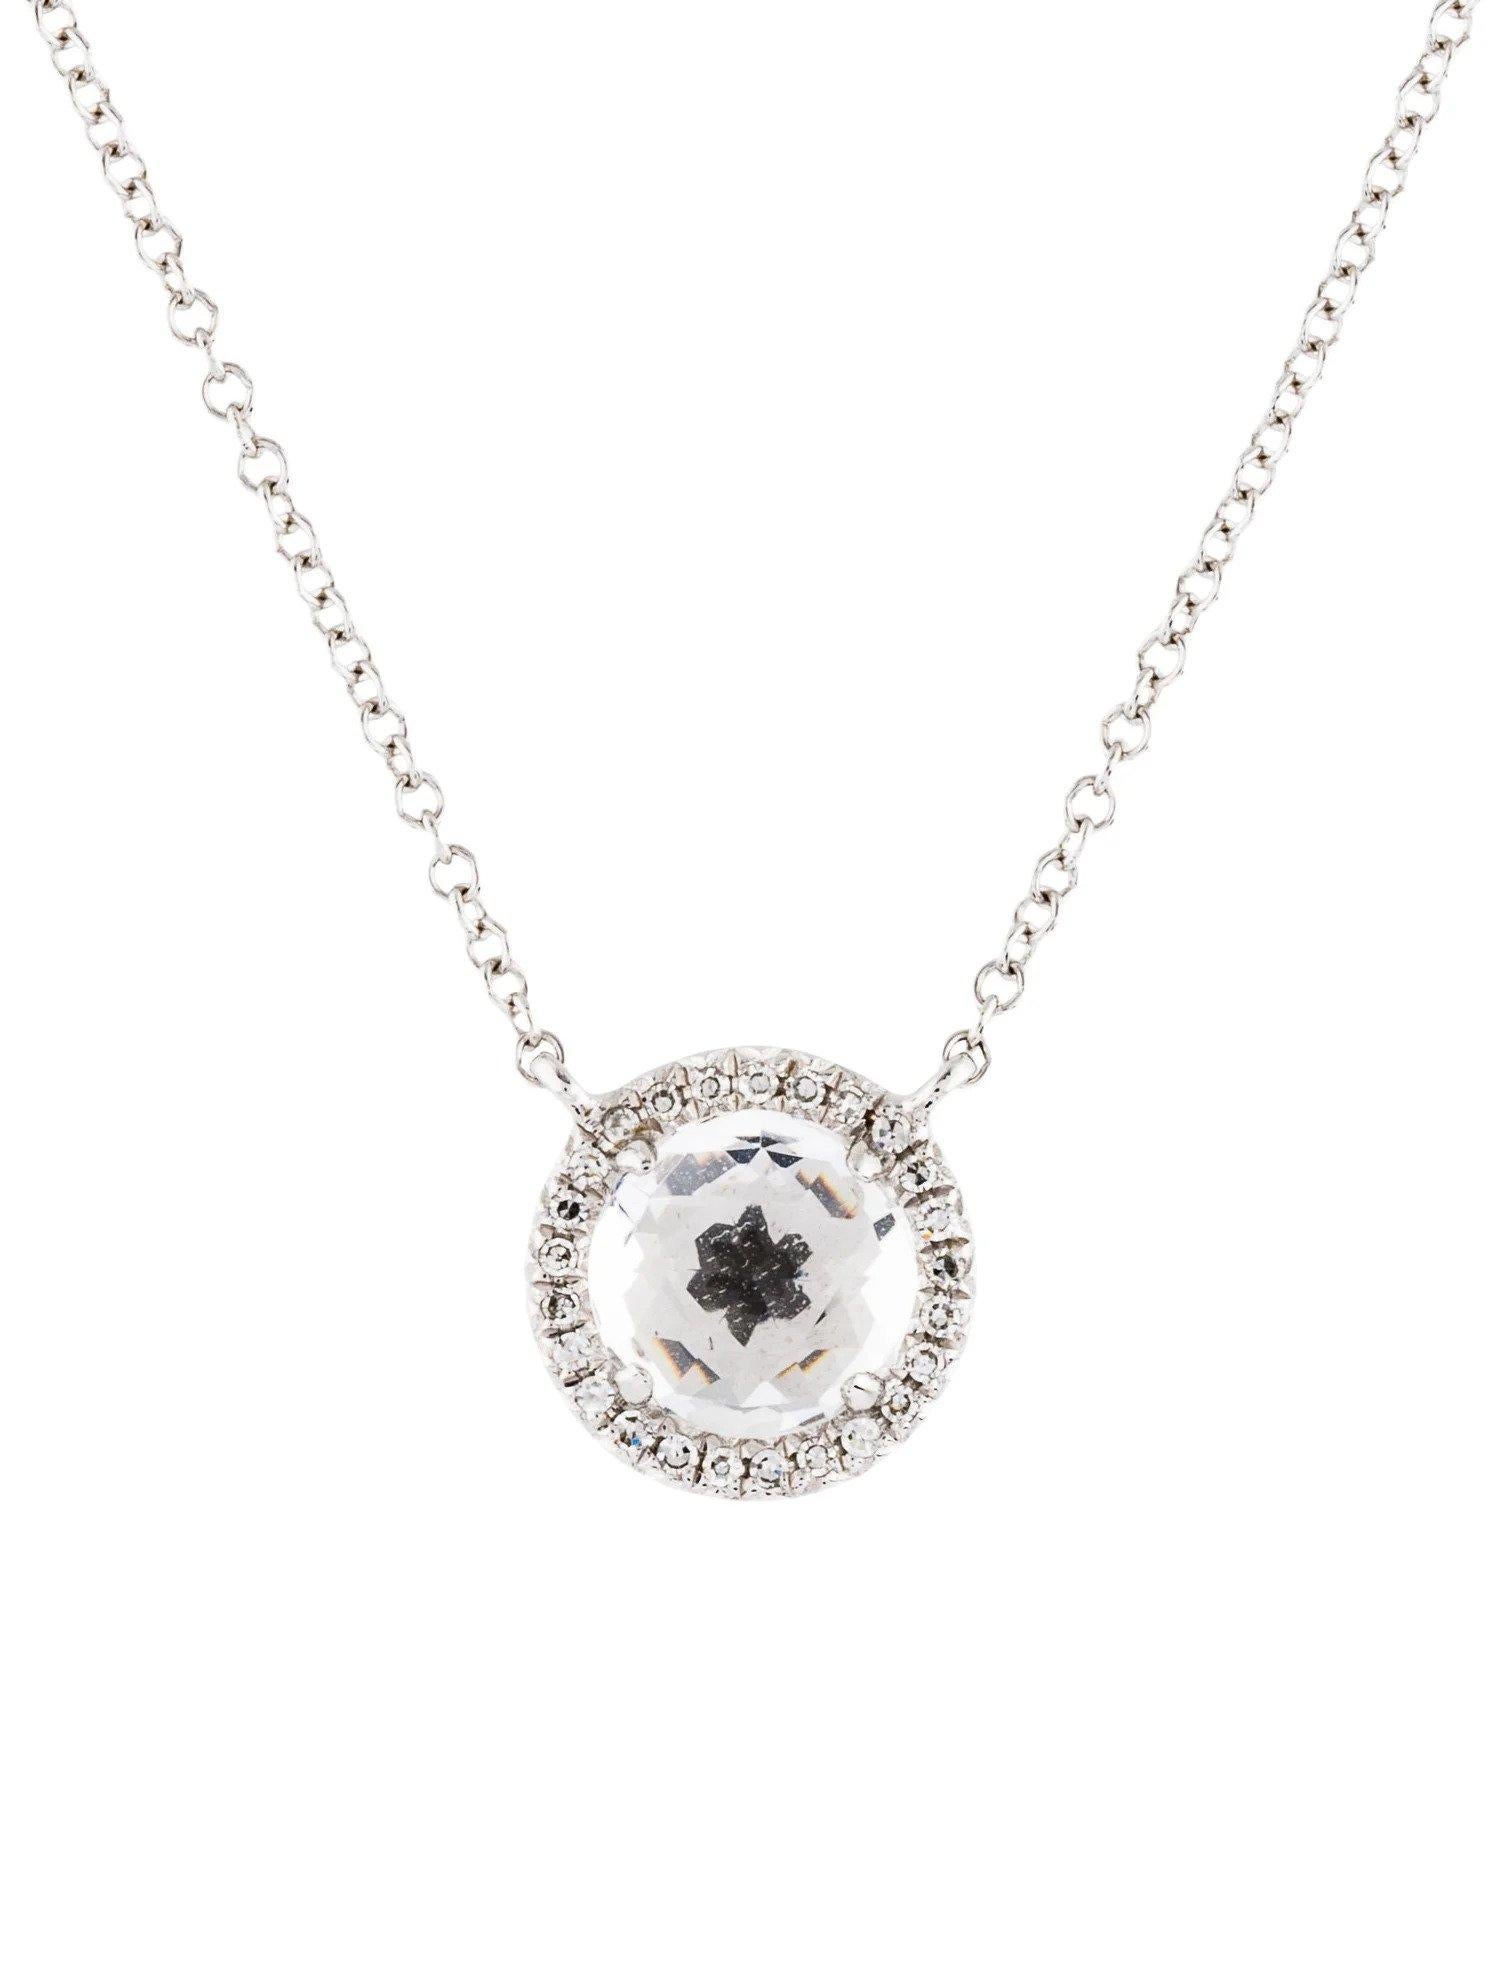 This White Topaz & Diamond Pendant is a stunning and timeless accessory that can add a touch of glamour and sophistication to any outfit. 

This pendant features a 1.25 Carat Round White Topaz, with a Diamond Halo comprised of 0.06 Carats of Single